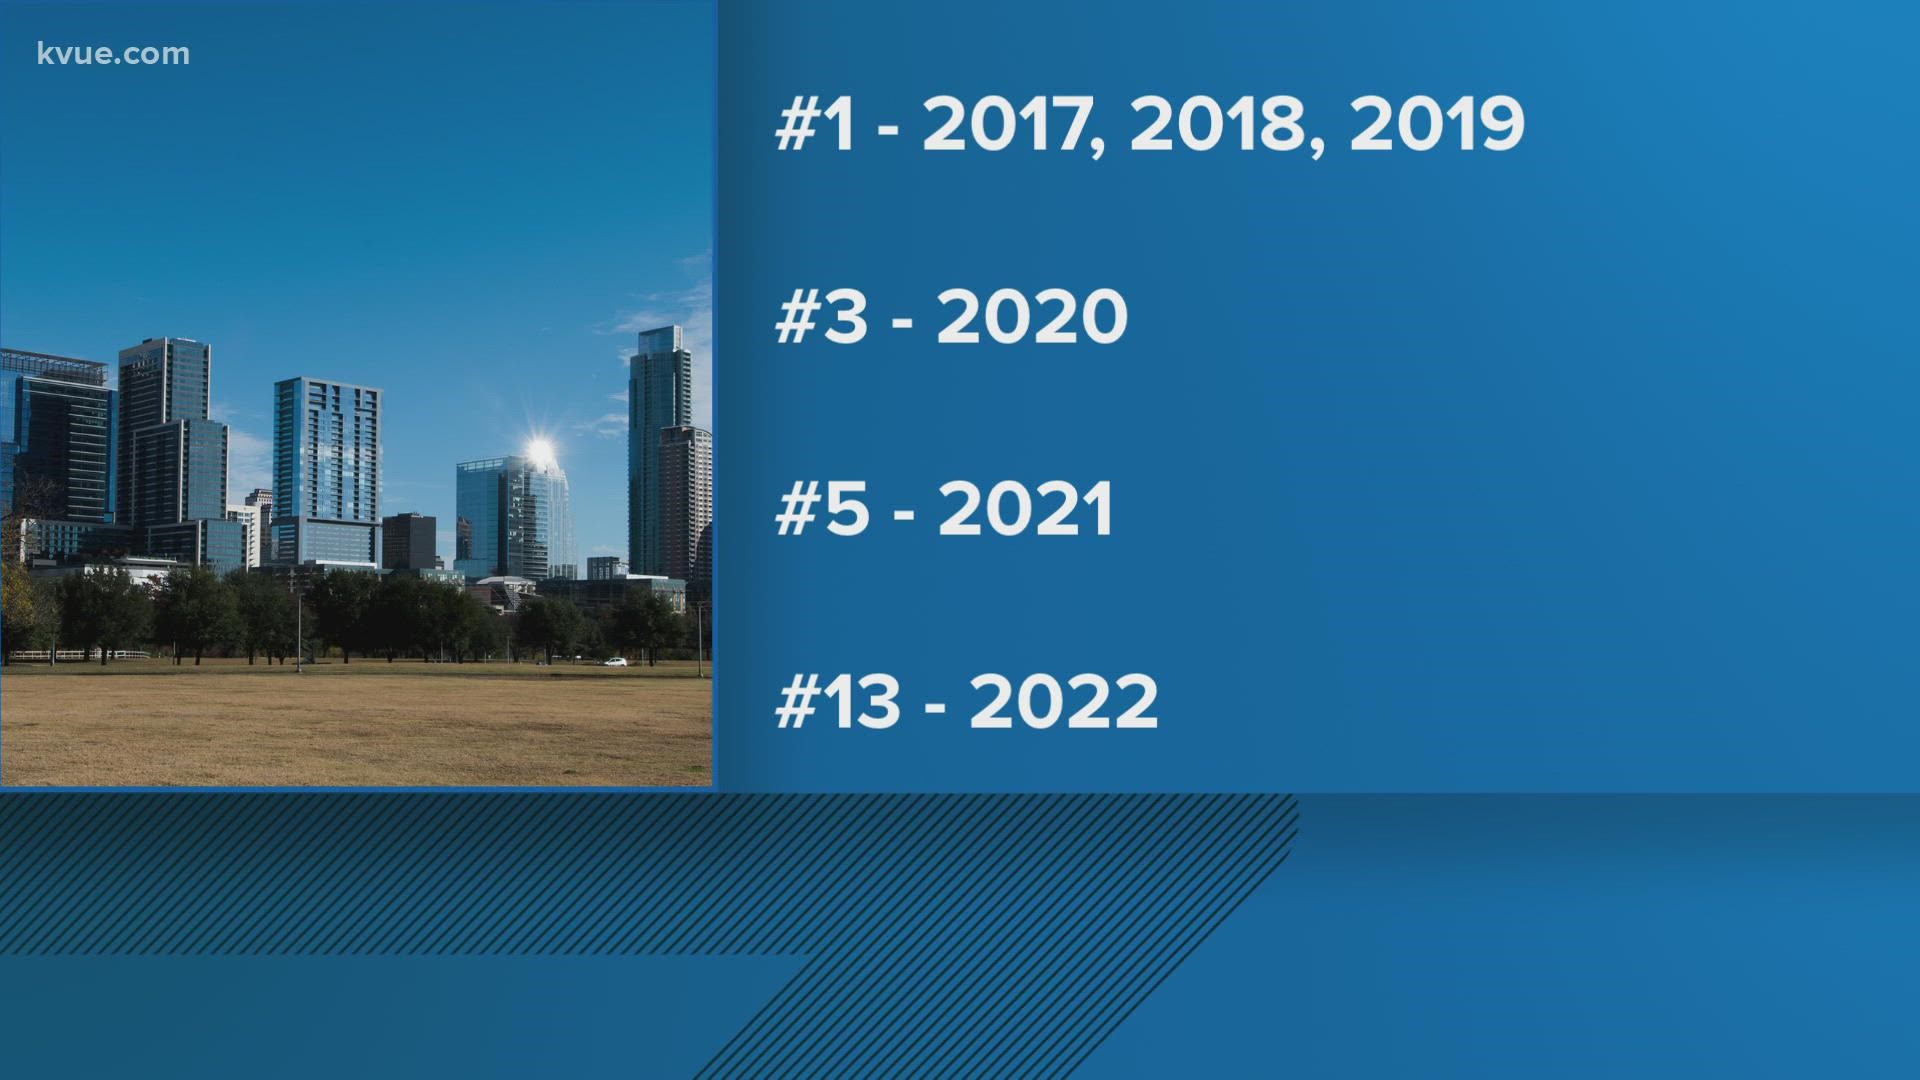 The Austin metro area tumbled from No. 5 last year to No. 13 this year.